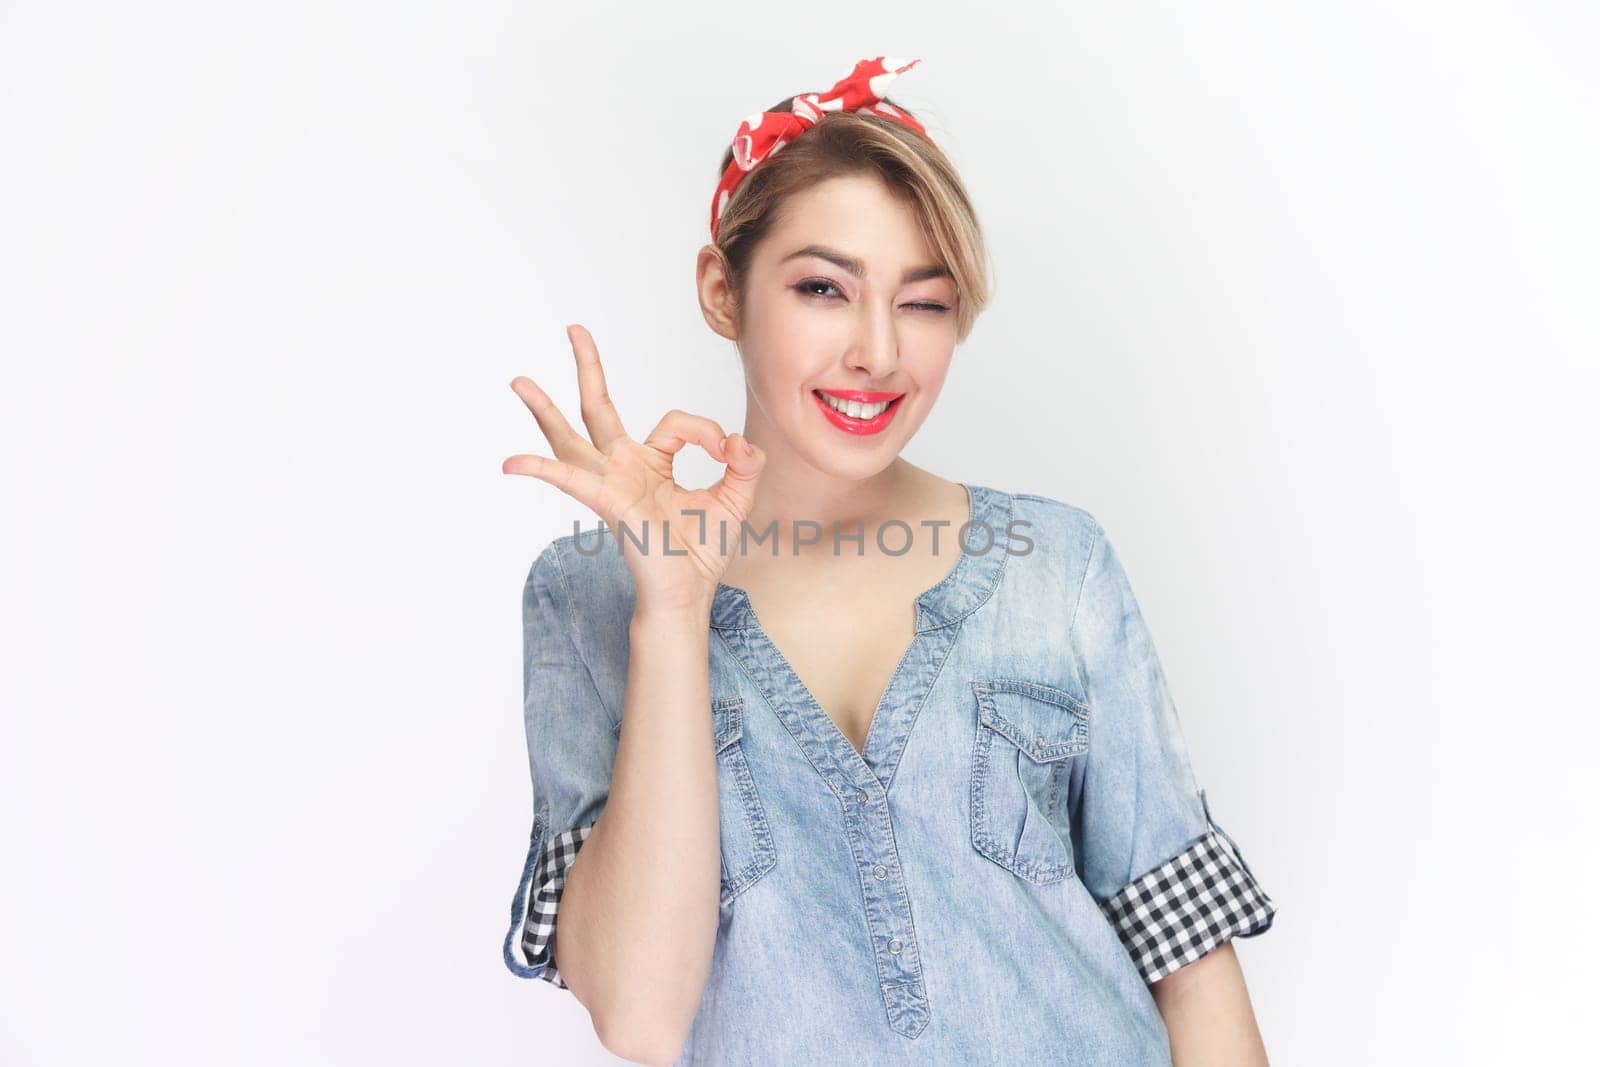 Portrait of blonde woman wearing blue denim shirt and red headband standing making okay gesture, enjoying life, saying ok, confirms information. Indoor studio shot isolated on gray background.